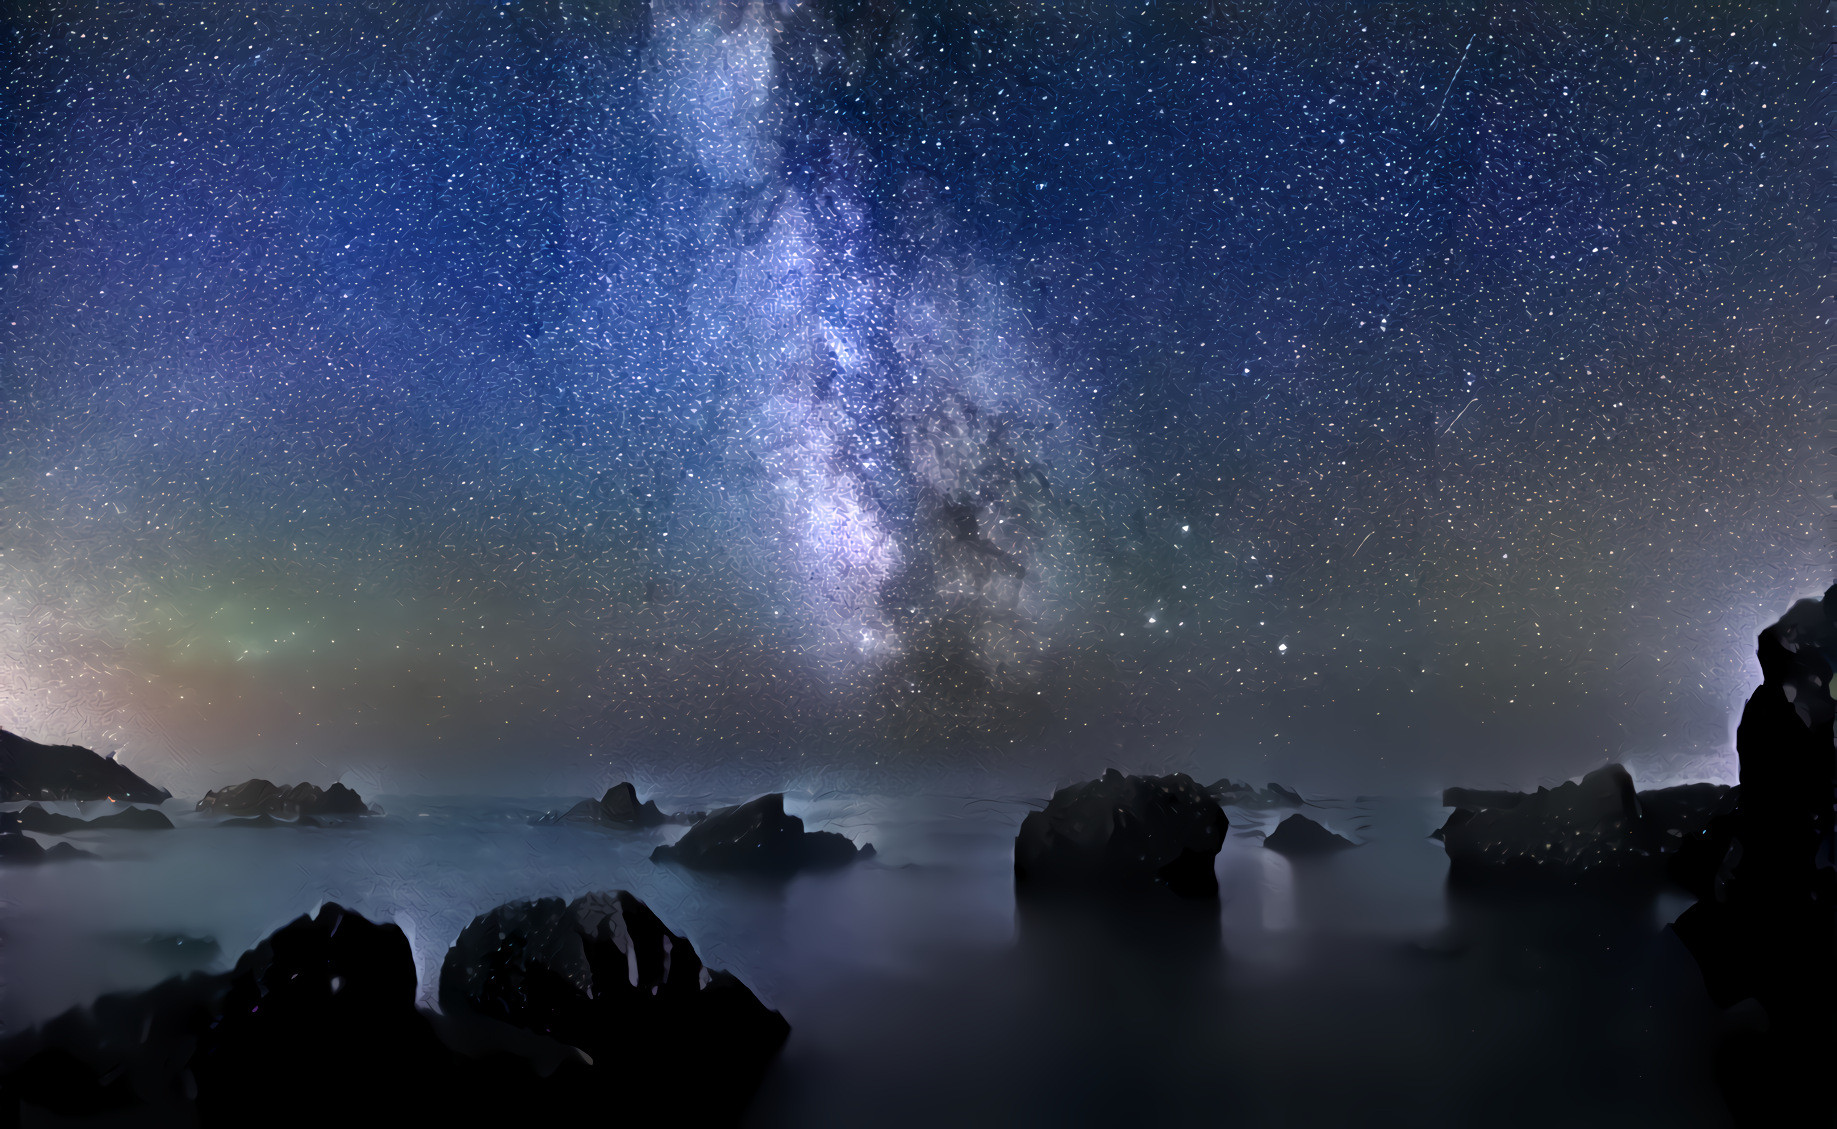 The Milky Way in Blue and Gray. Source photo by Luca Baggio and filter photo by Štefan Štefančík, both on Unsplash.